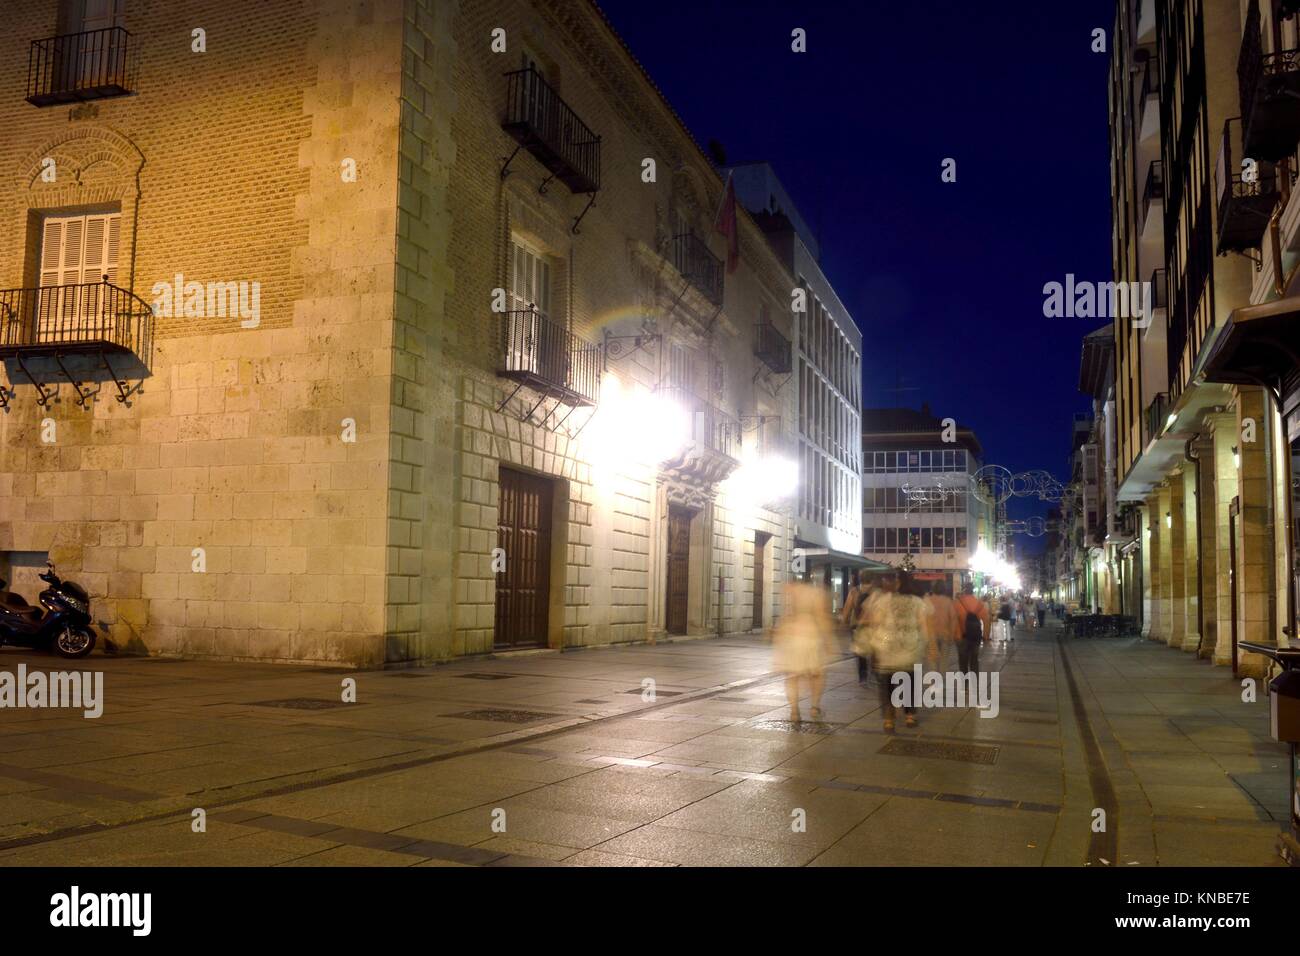 nightlife in the historical center of the city of Palencia, Castilla y Leon, Spain. Stock Photo